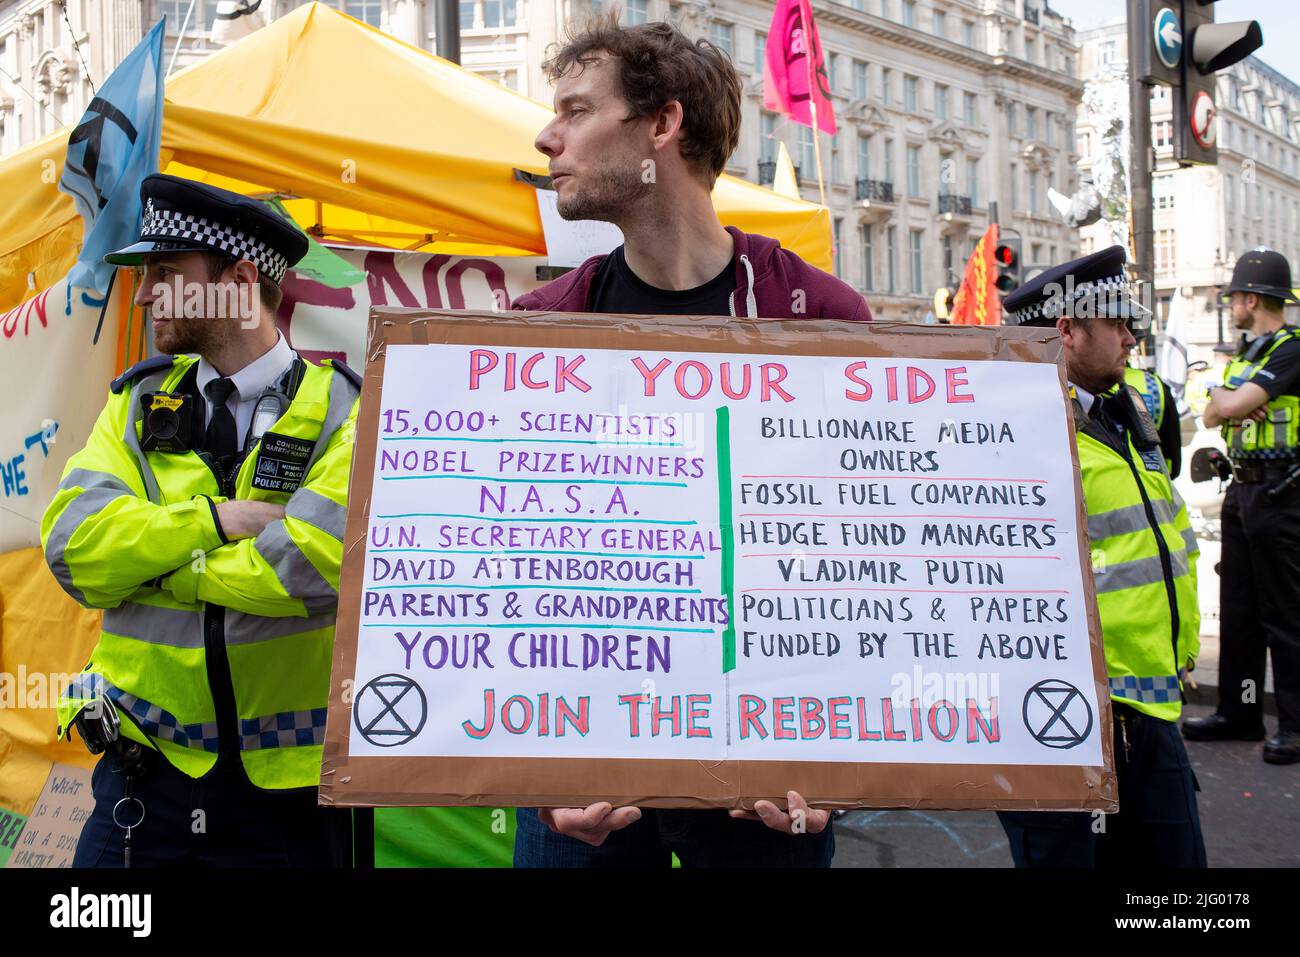 Climate change protester& police at the Extinction Rebellion demonstration, London, in protest of world climate breakdown and ecological collapse. Stock Photo